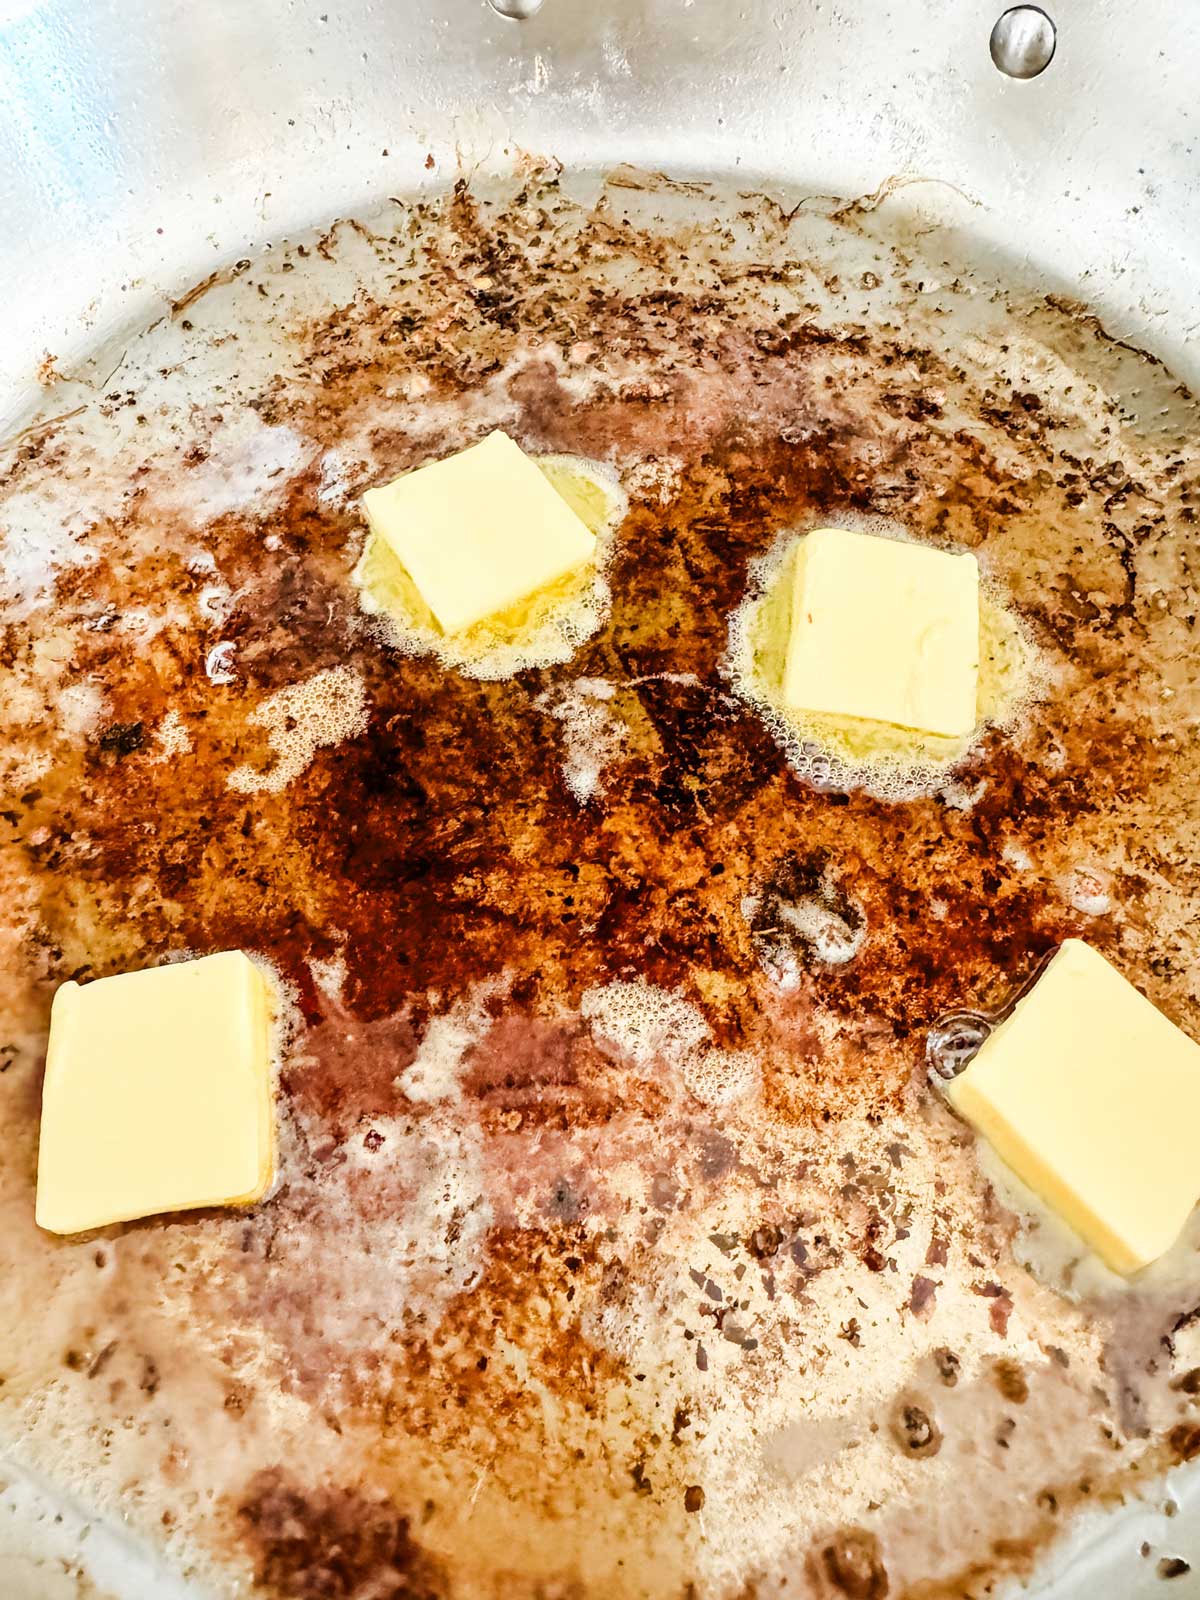 Butter being added to a skillet of bacon grease.